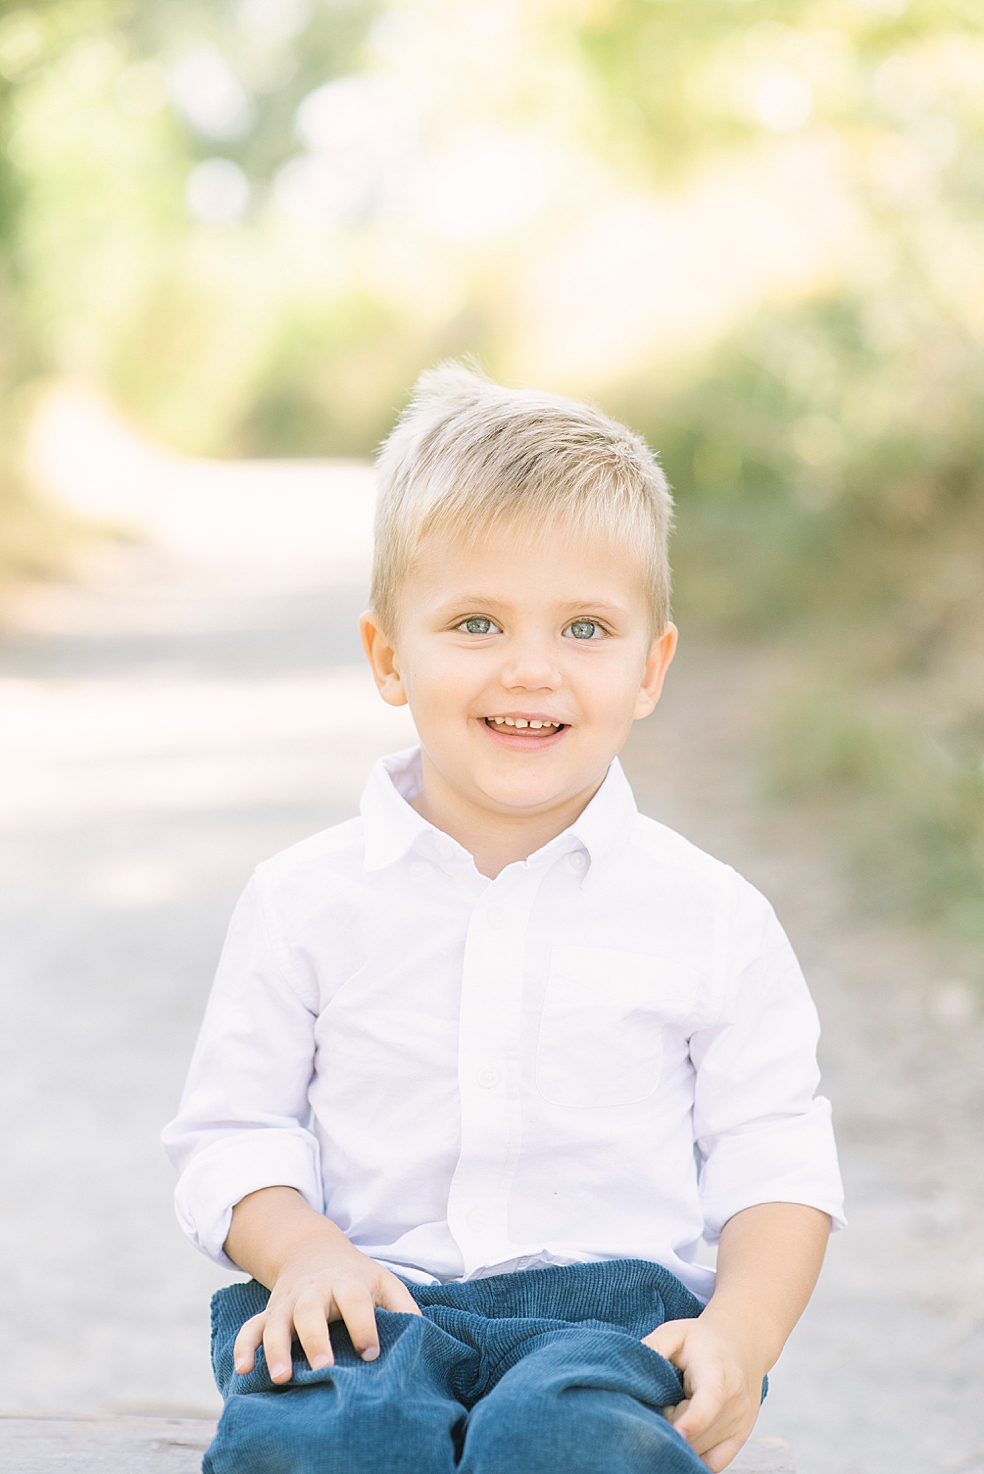 Little boy in blue and white smiling | Photo by Jessica Lee Photography